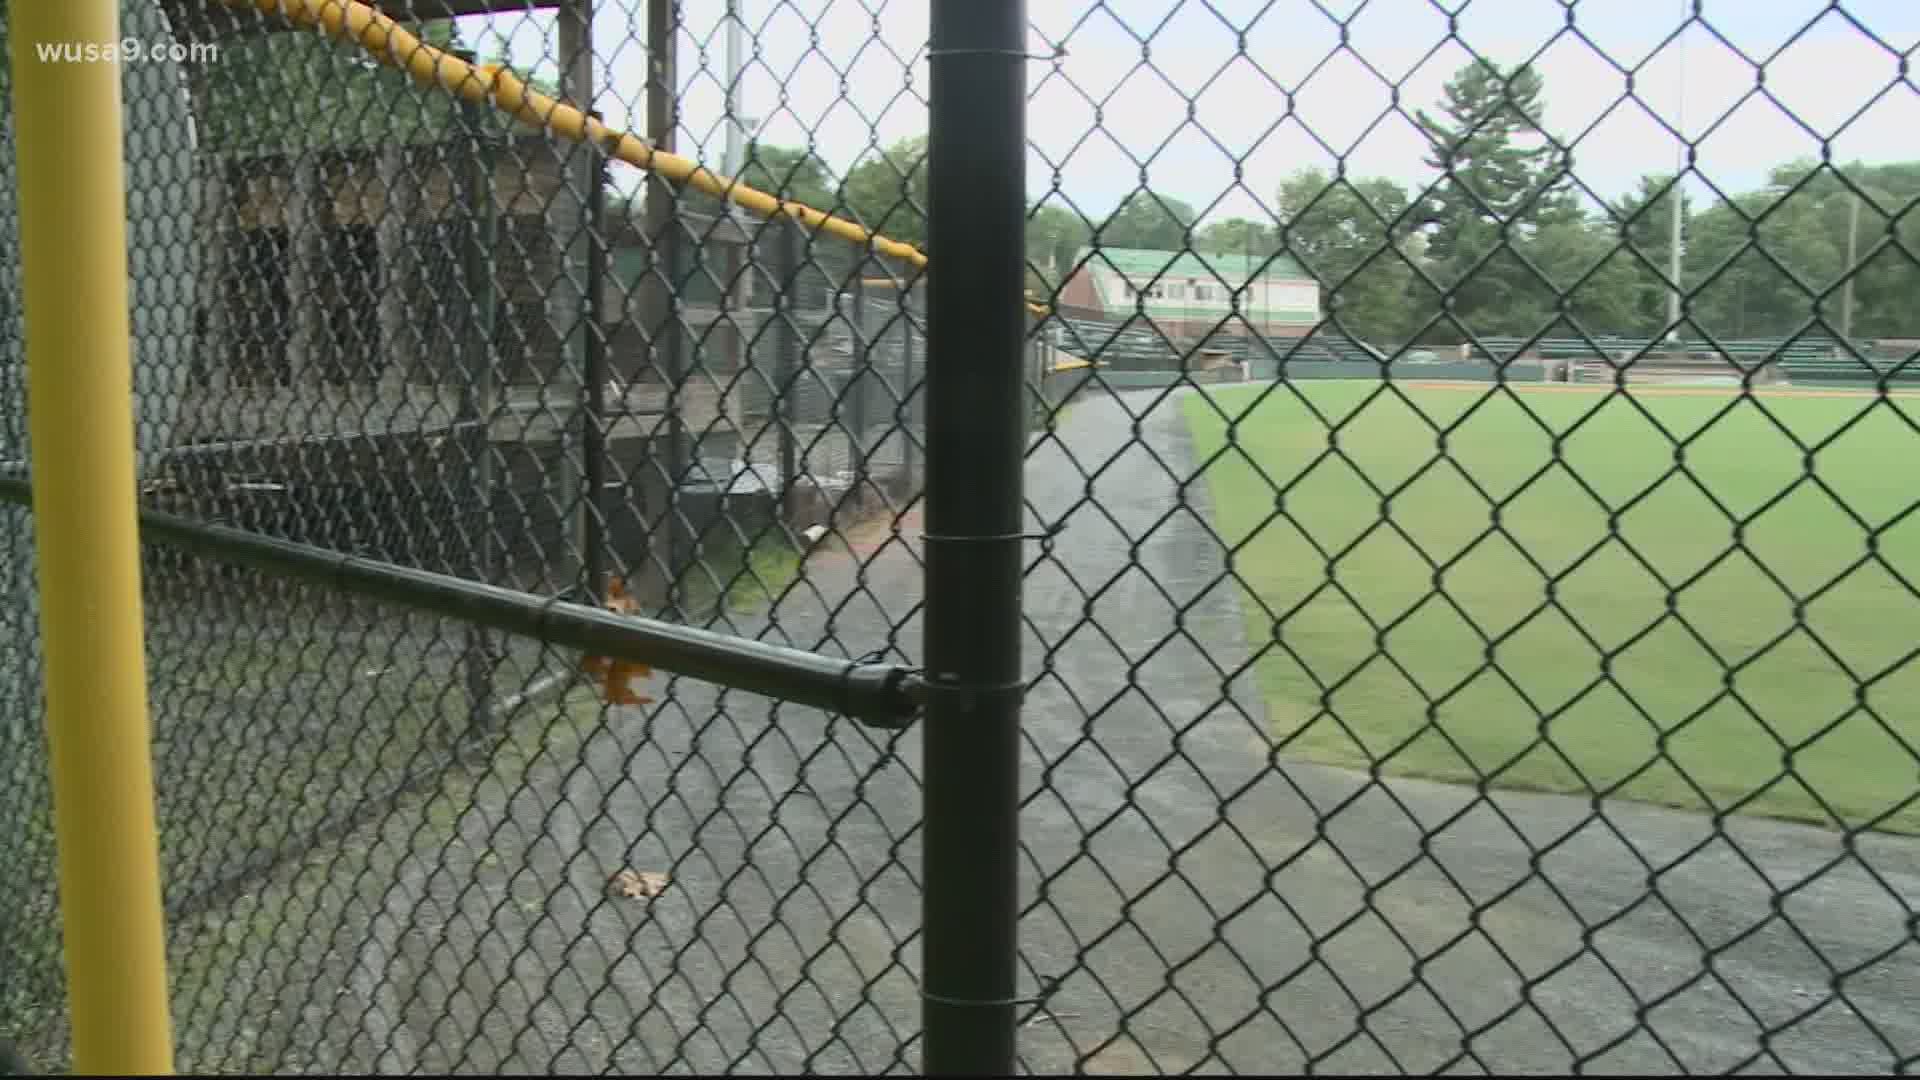 After being closed due to the pandemic, athletic fields in Montgomery County will reopen in September while requiring players to take special precautions.